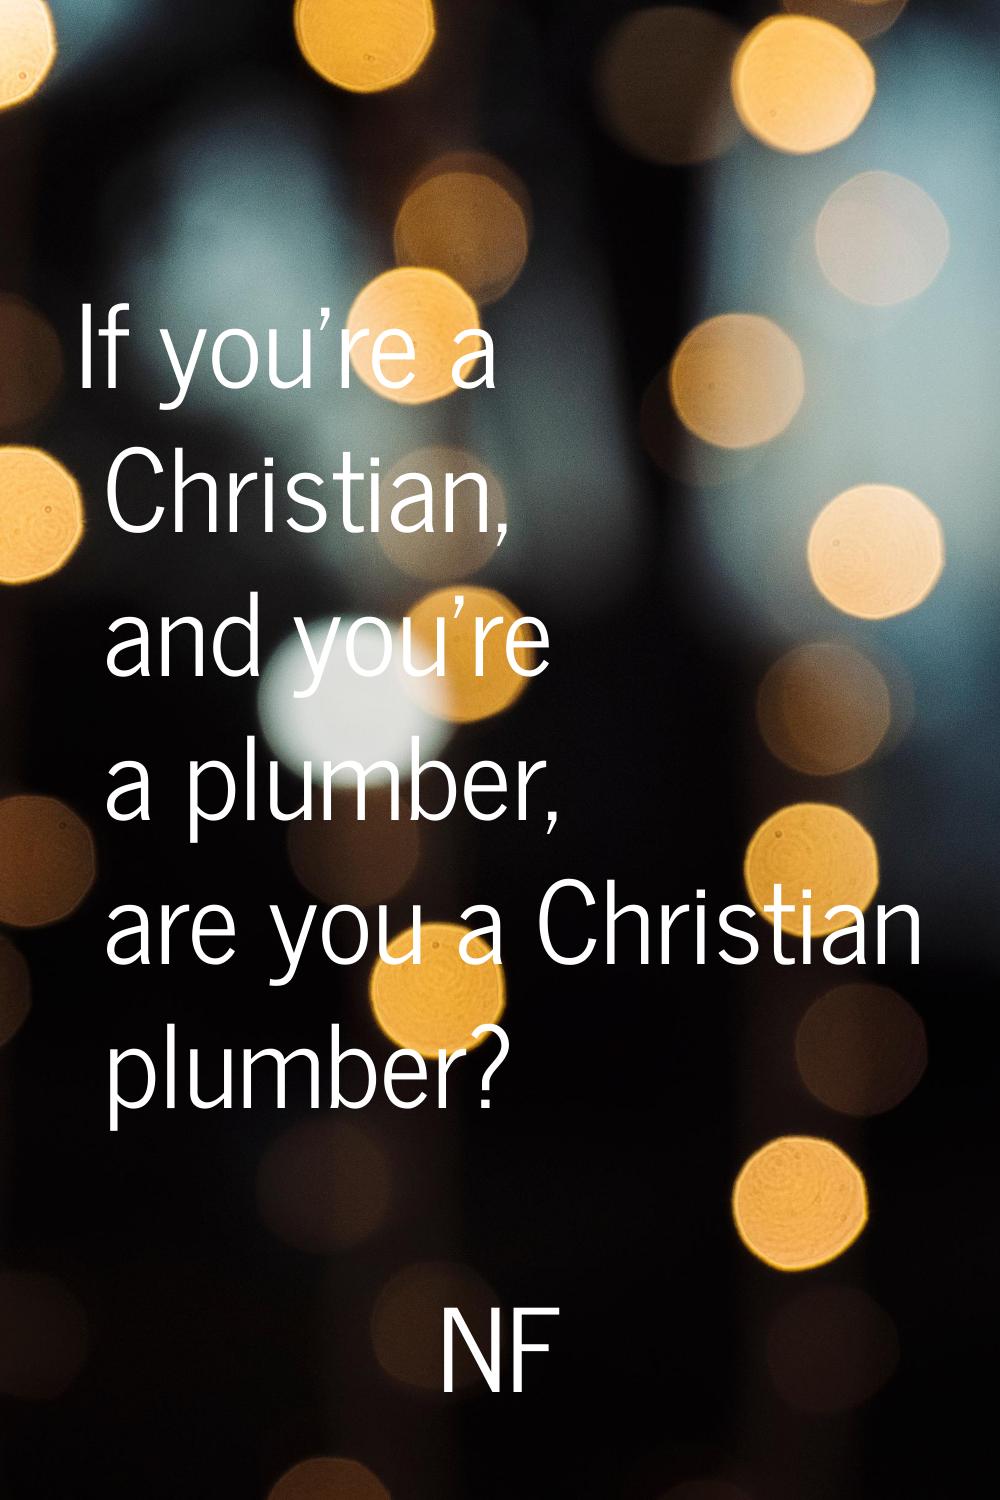 If you're a Christian, and you're a plumber, are you a Christian plumber?